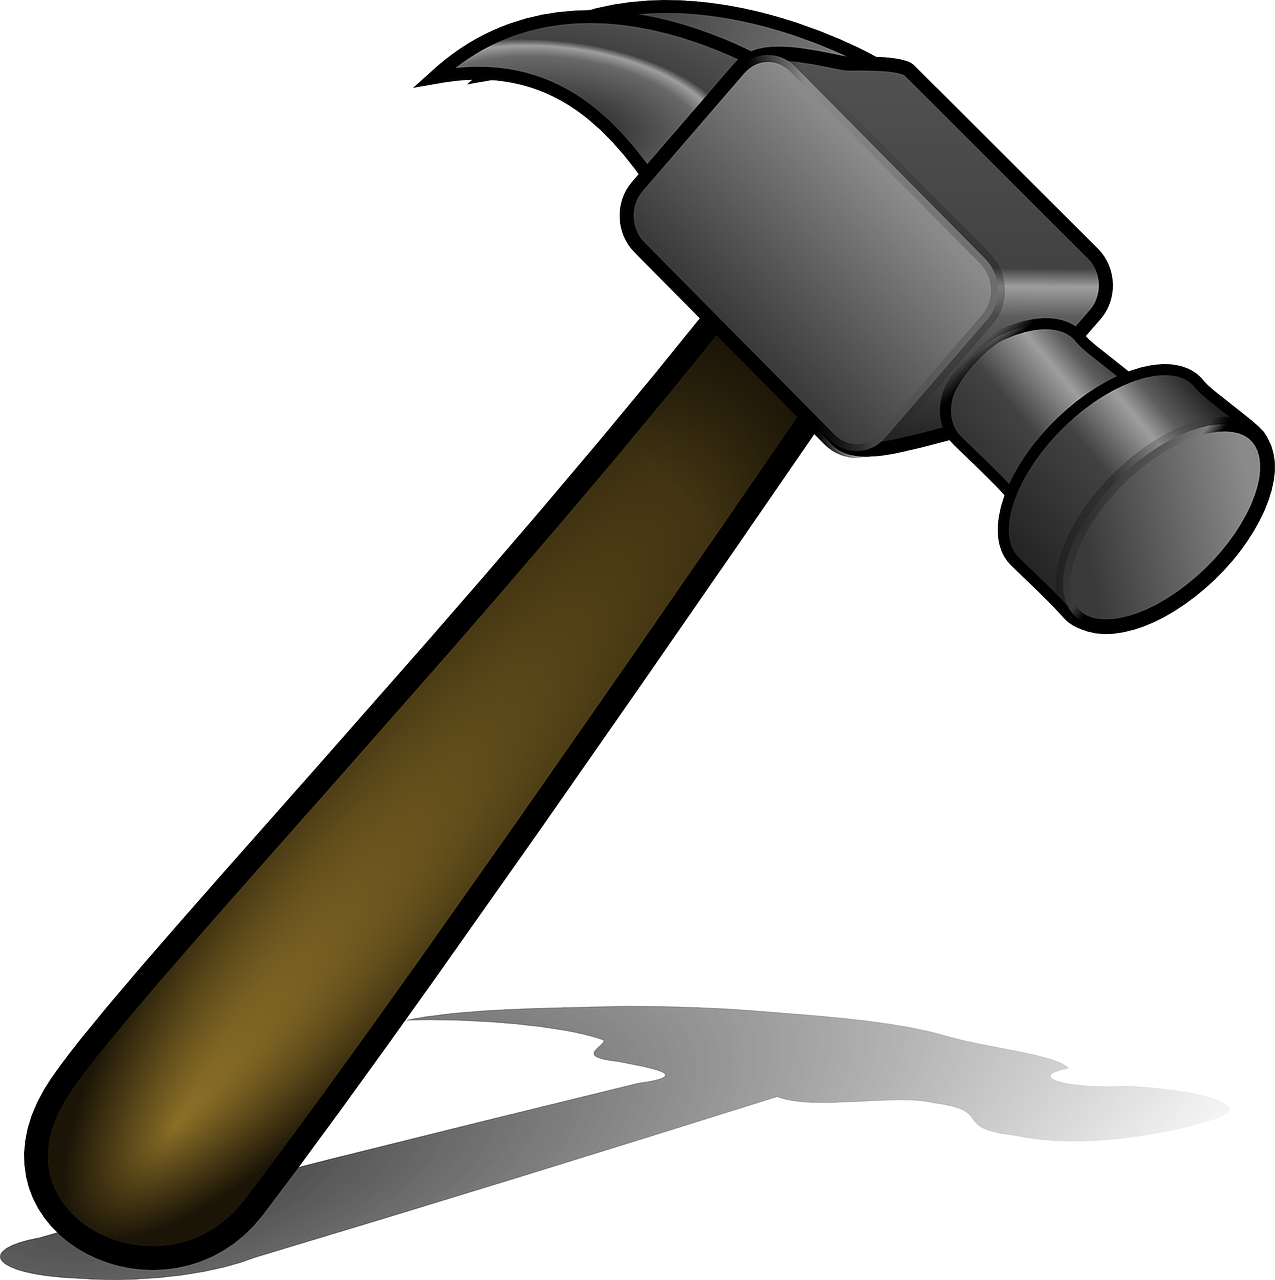 hammer-33617_1280.png